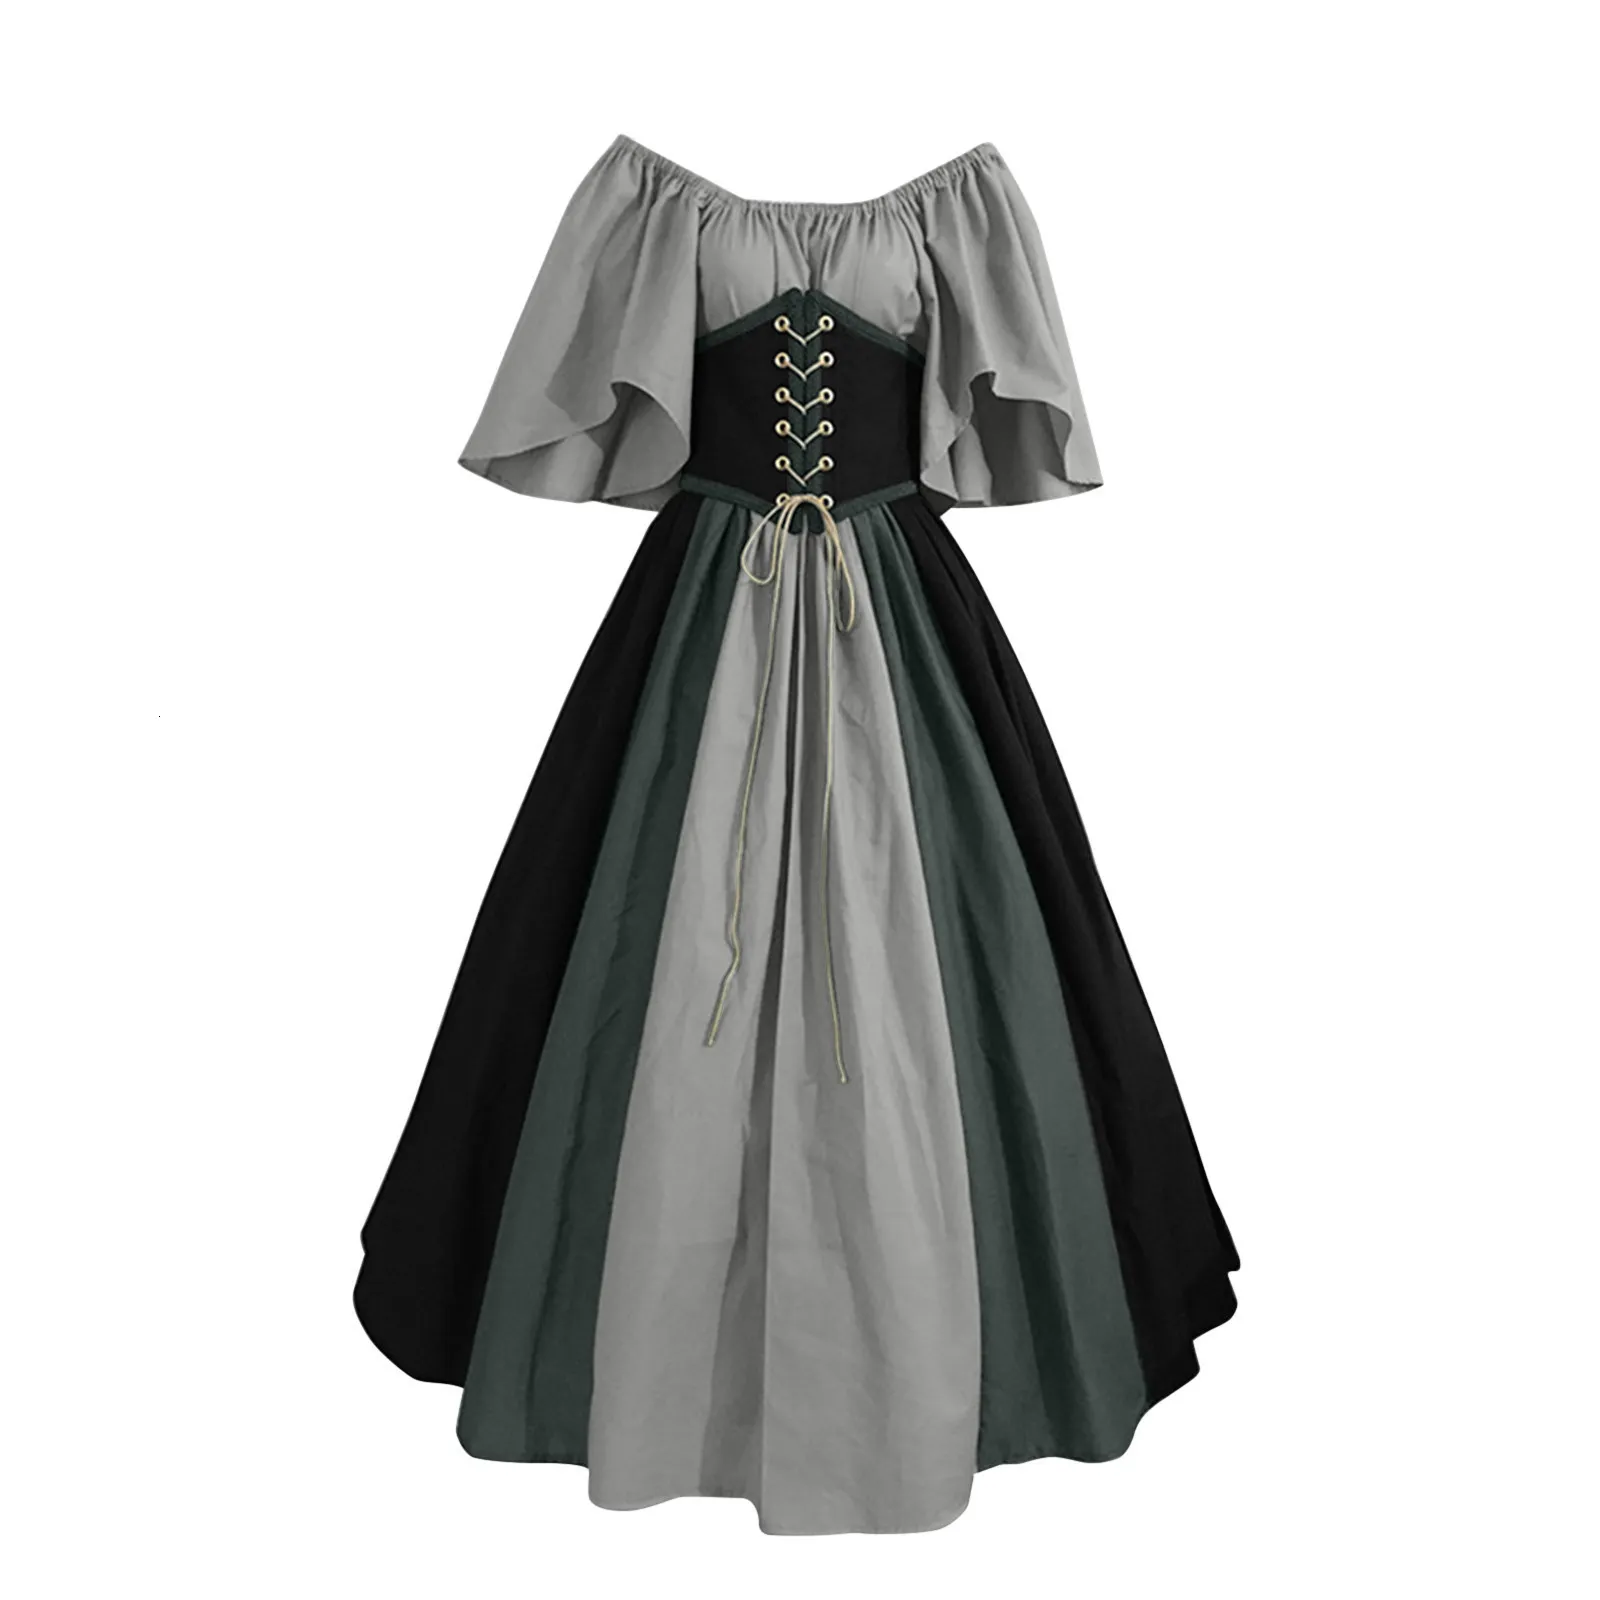 Vintage Victorian Lace Up Vintage Party Dress With Corset For Carnival And  Cosplay Ladys Long Robe Costume Style #230428 From Luo04, $22.89